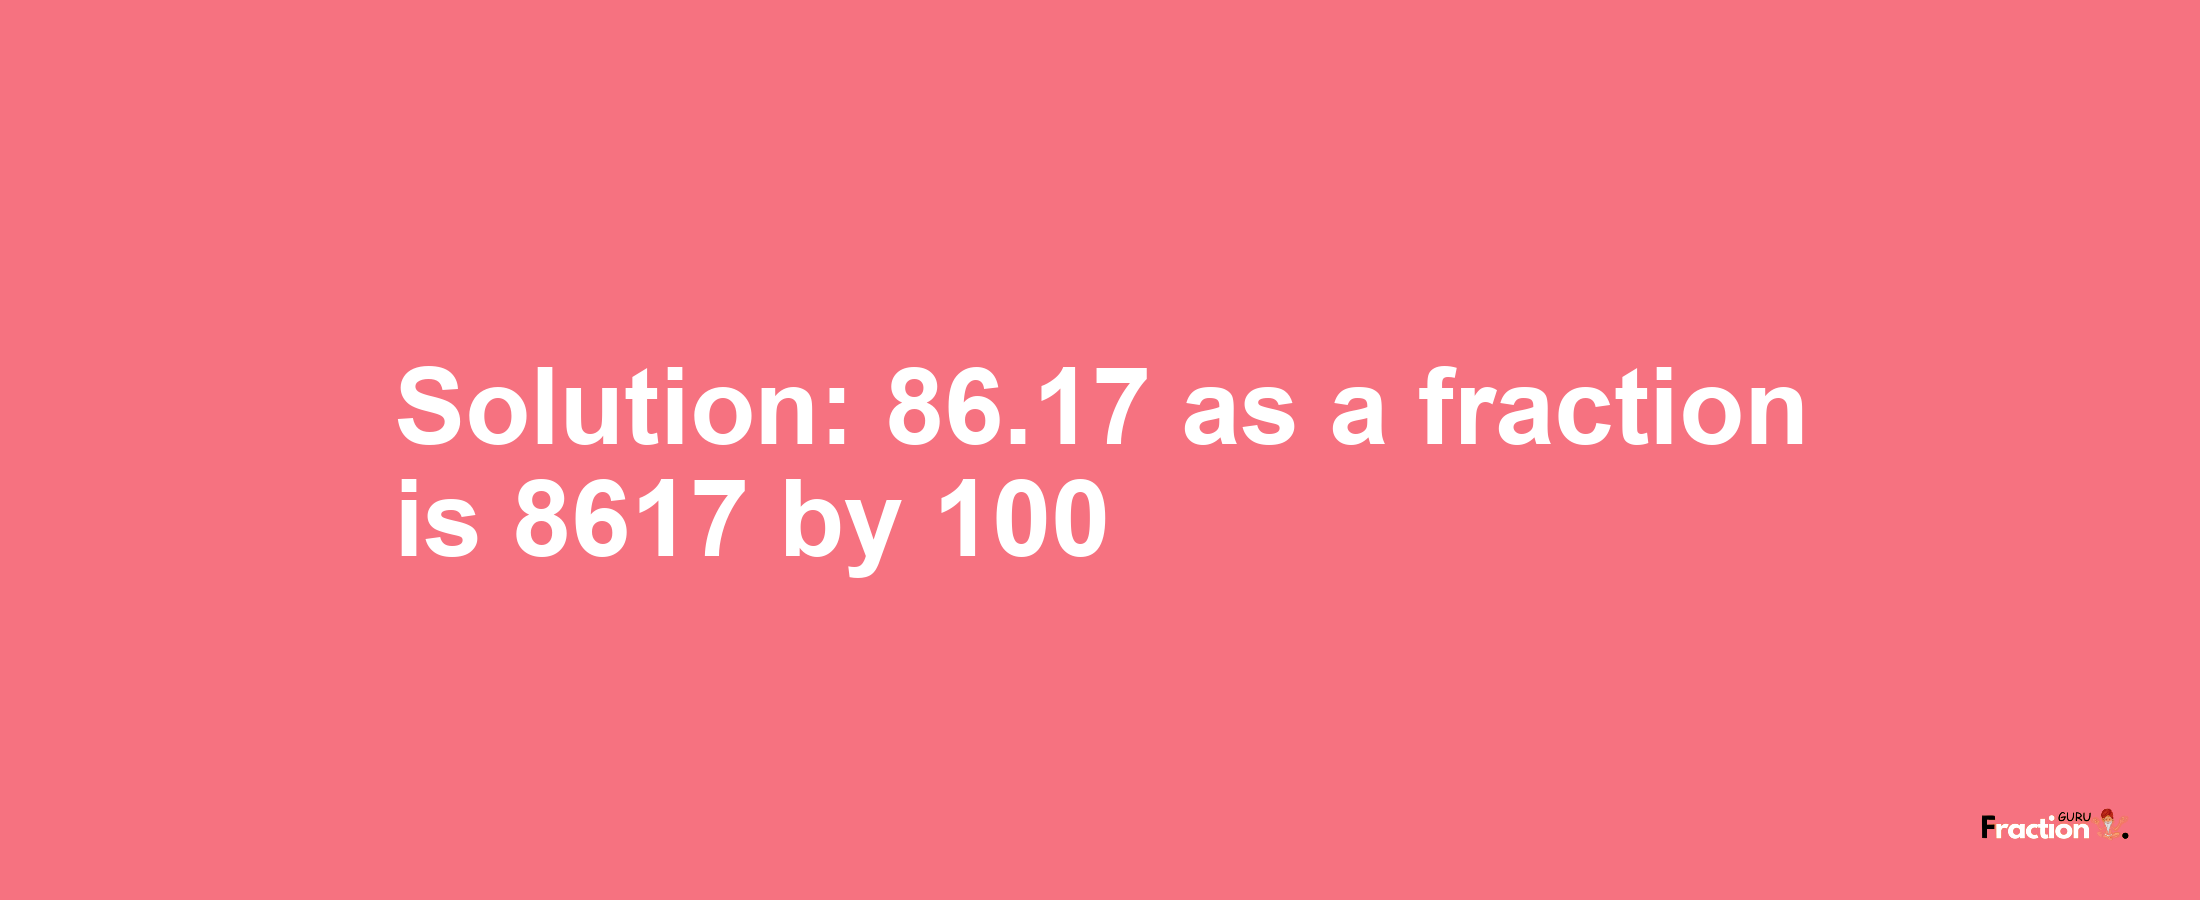 Solution:86.17 as a fraction is 8617/100